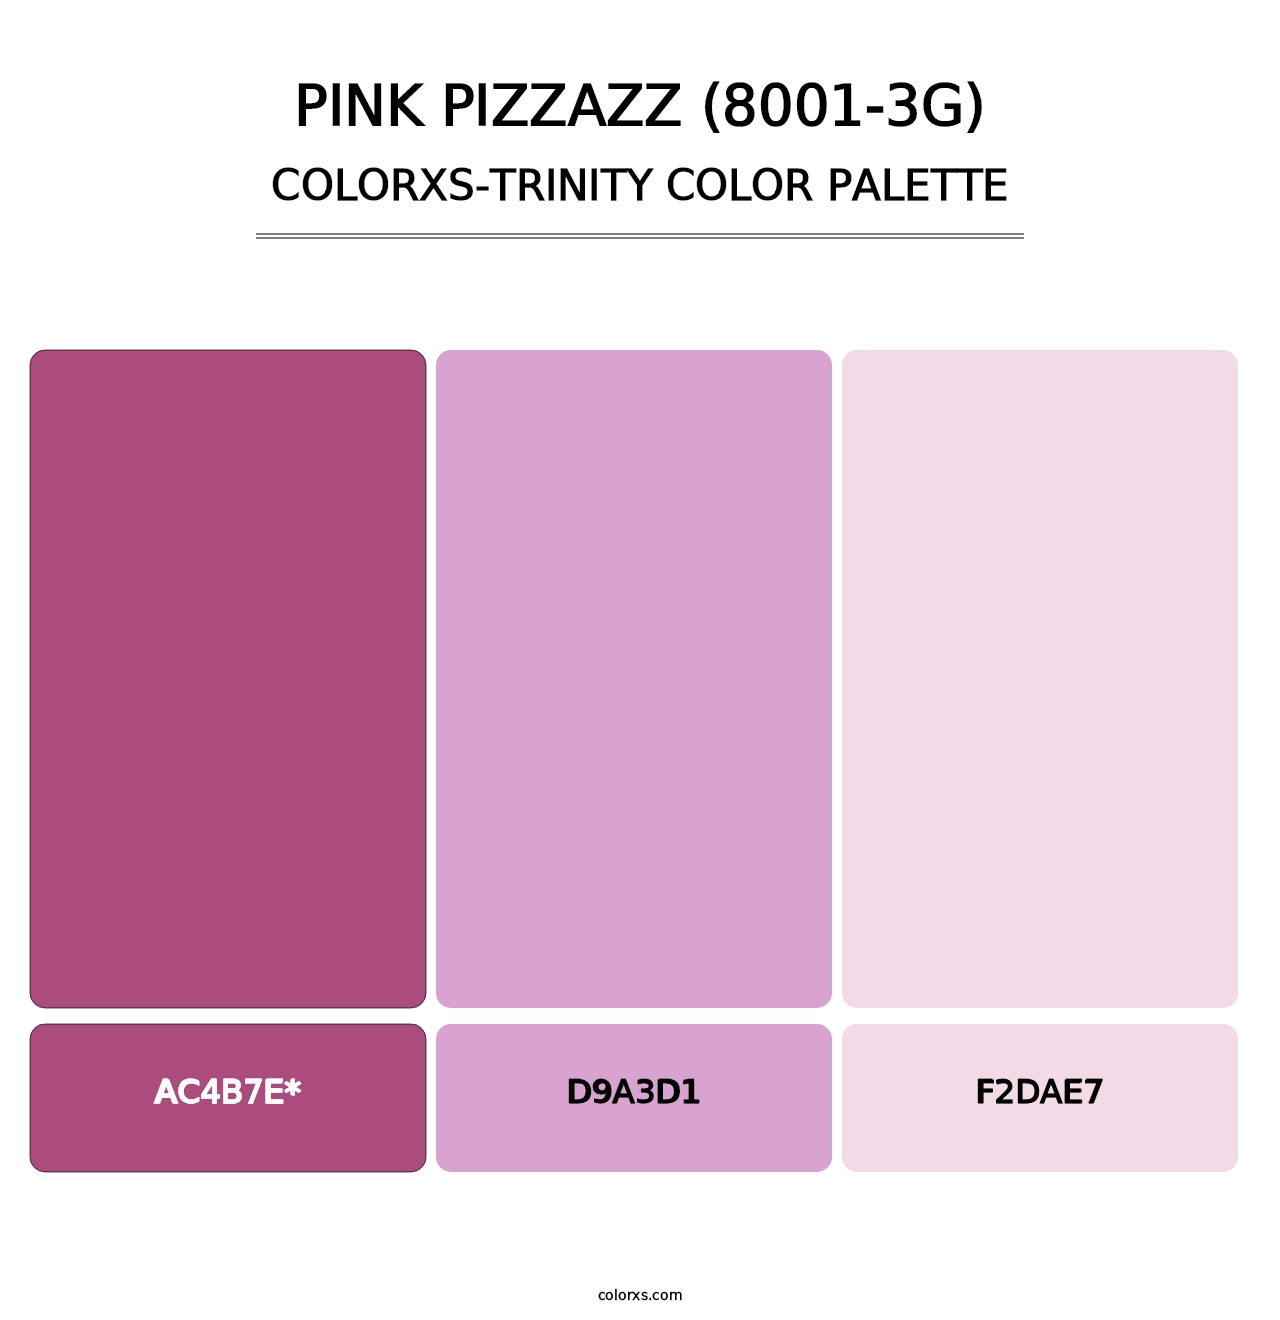 Pink Pizzazz (8001-3G) - Colorxs Trinity Palette